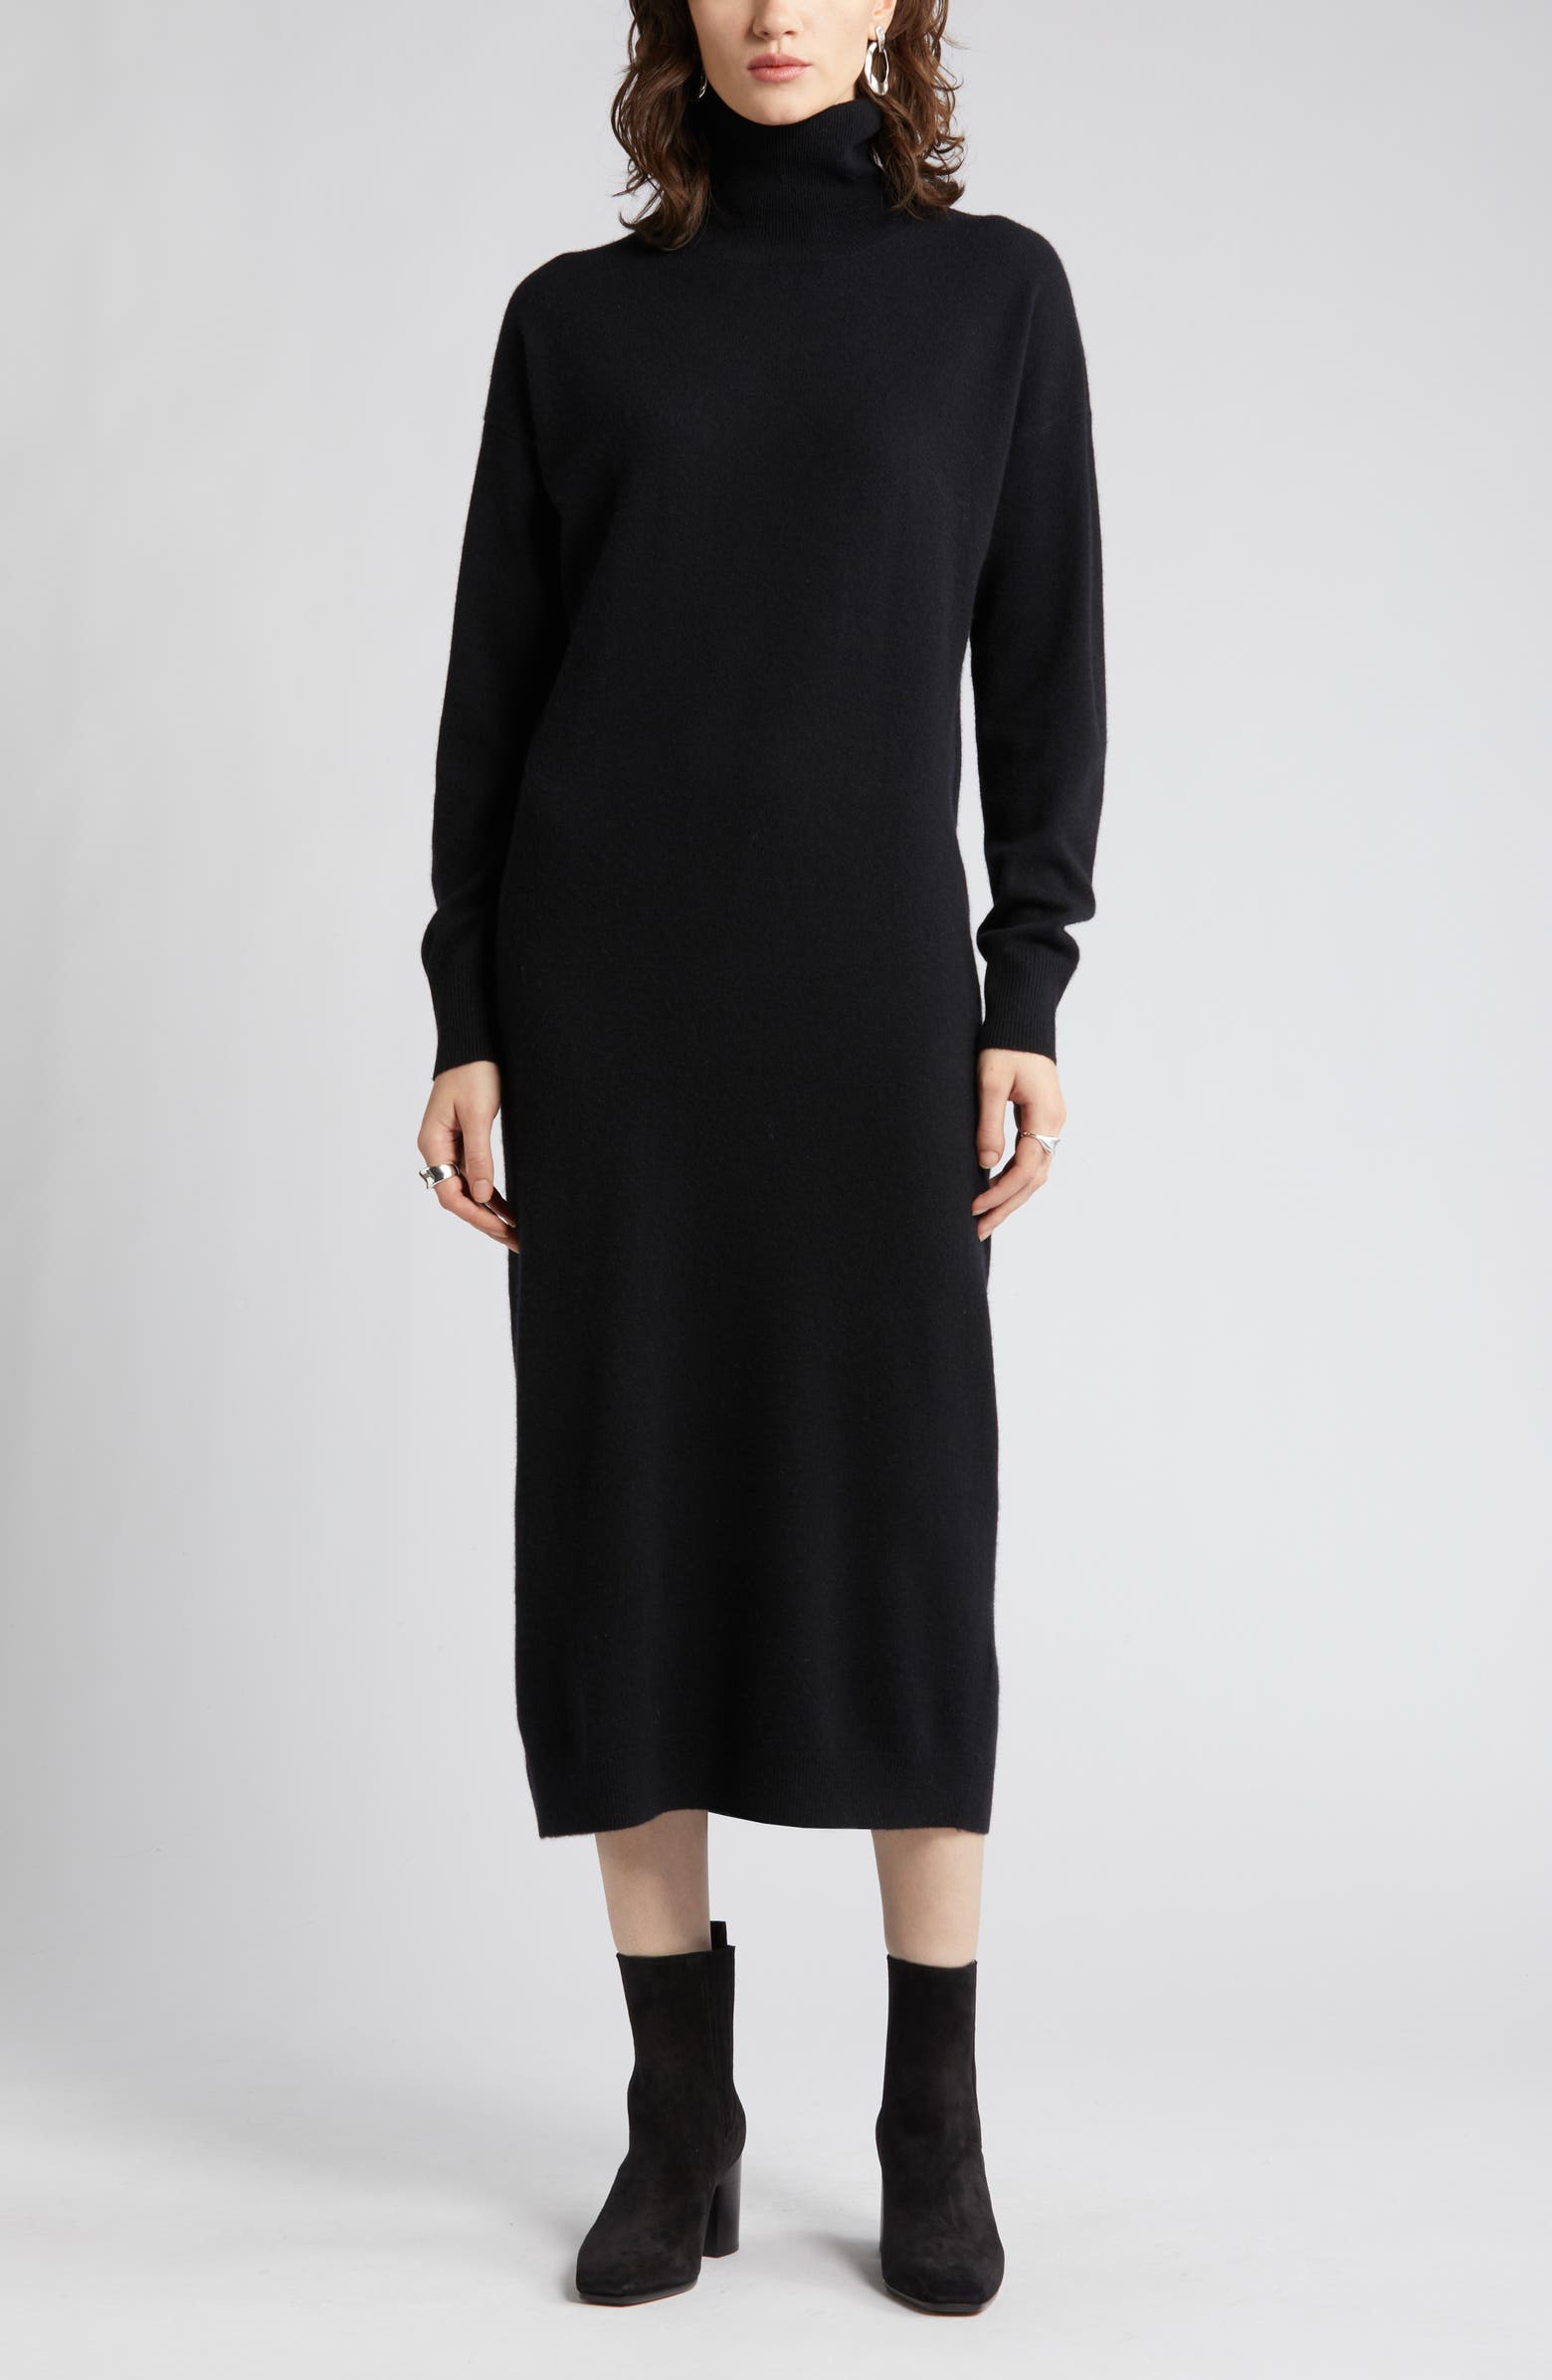 Nordstrom Long Sleeve Wool & Cashmere Sweater Dress | Nordstrom